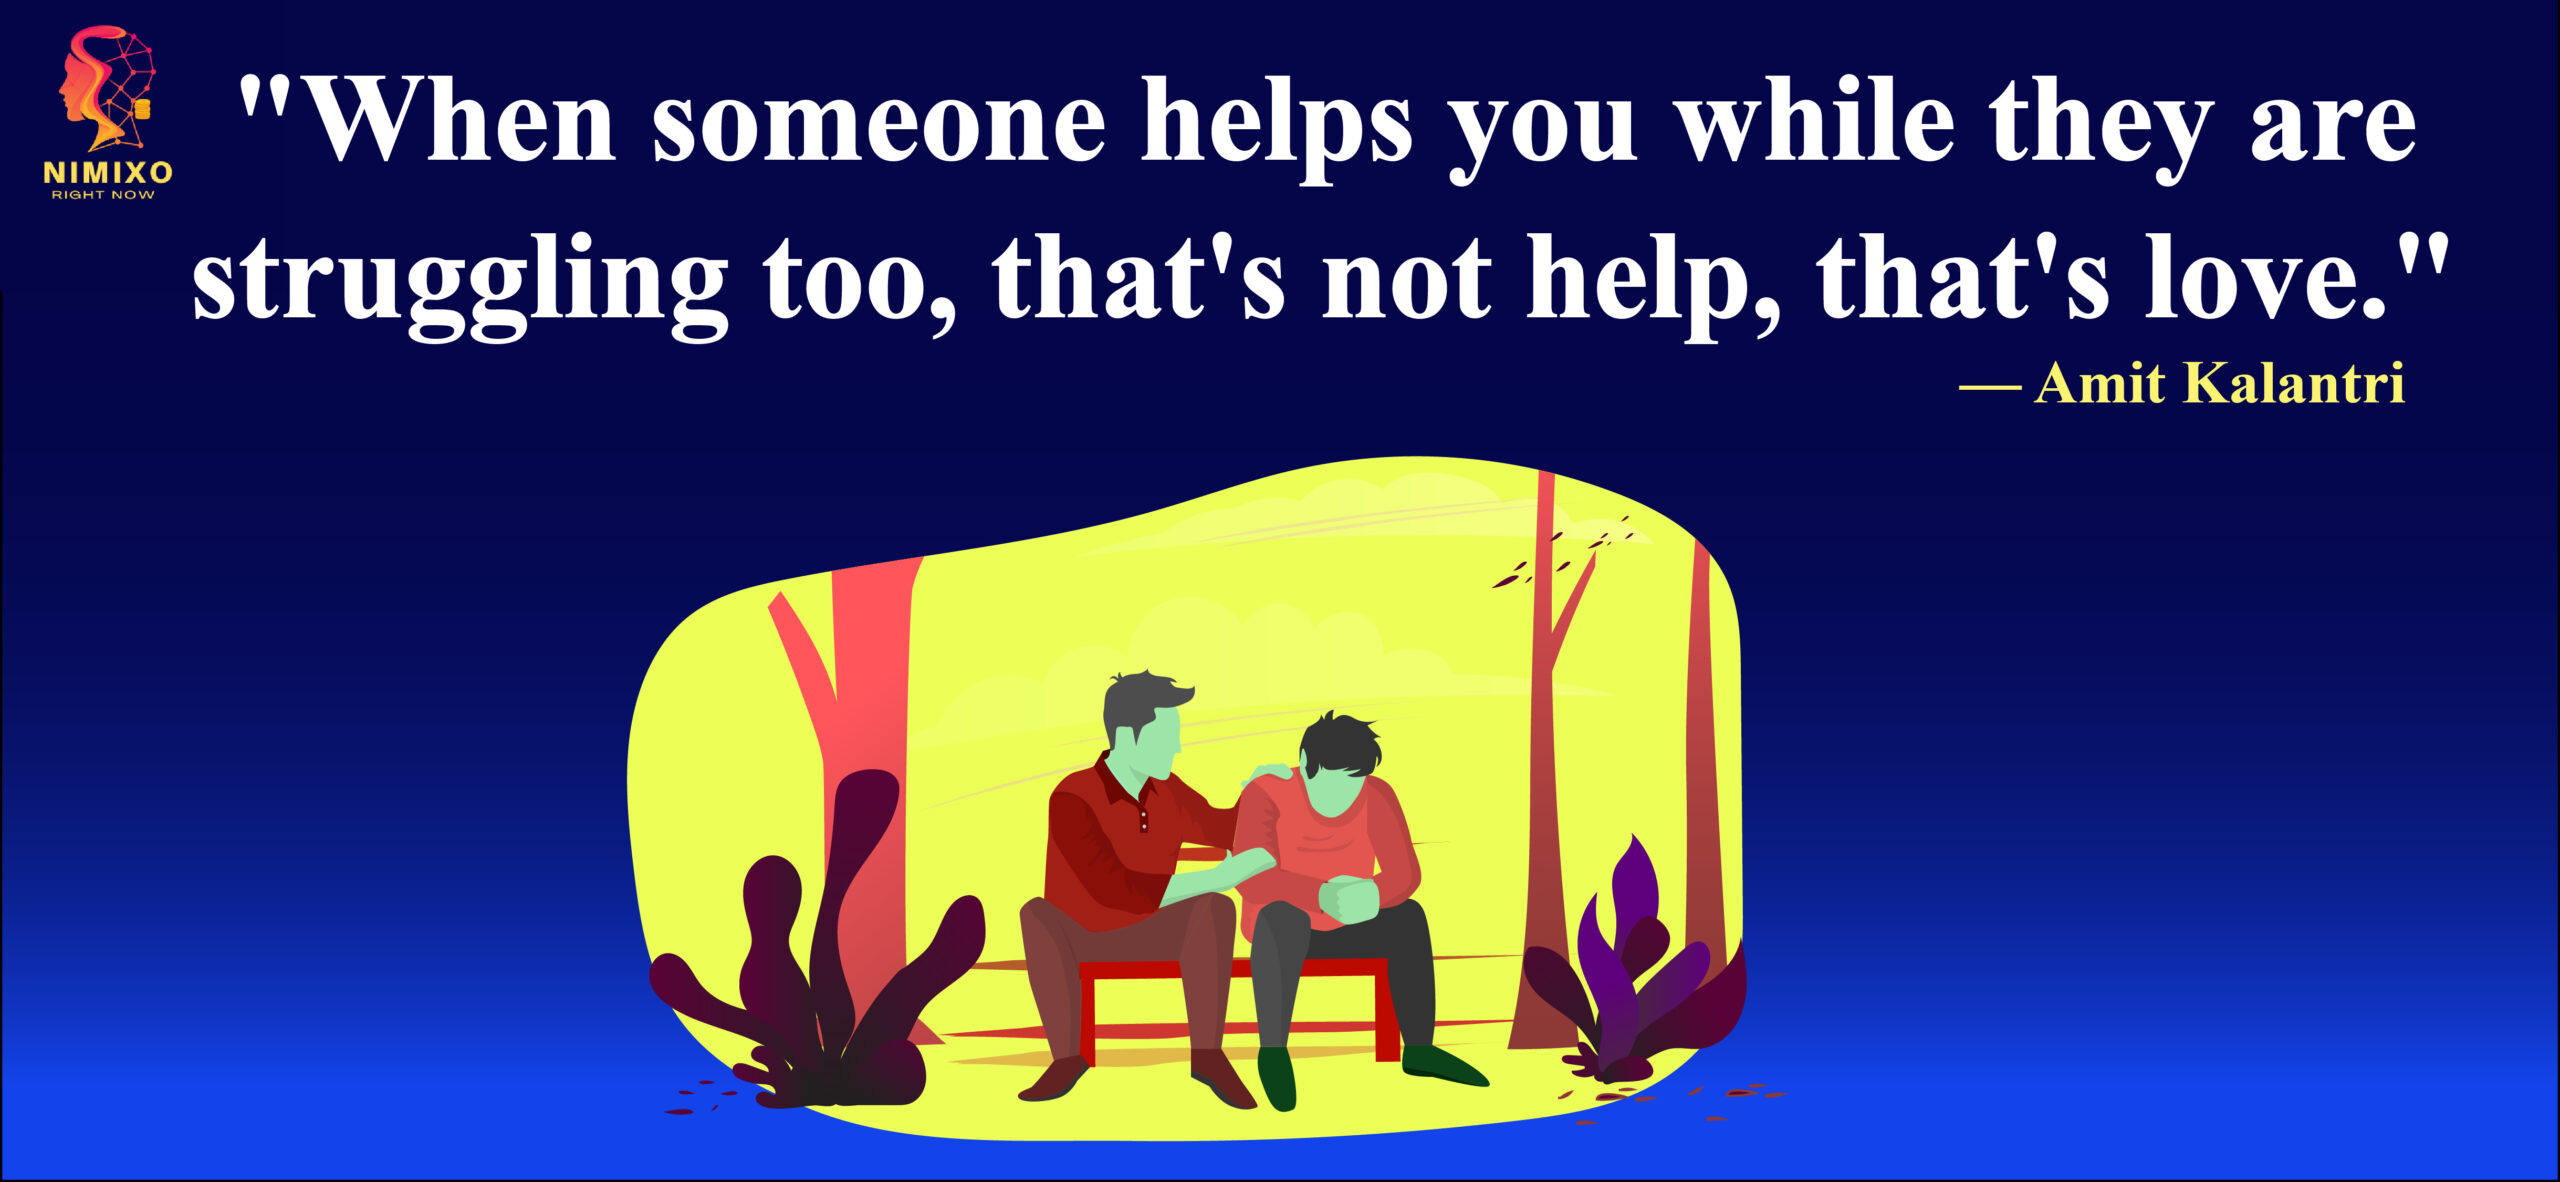 When someone helps you while they are struggling too, that's not help, that's love. -Amit Kalantri